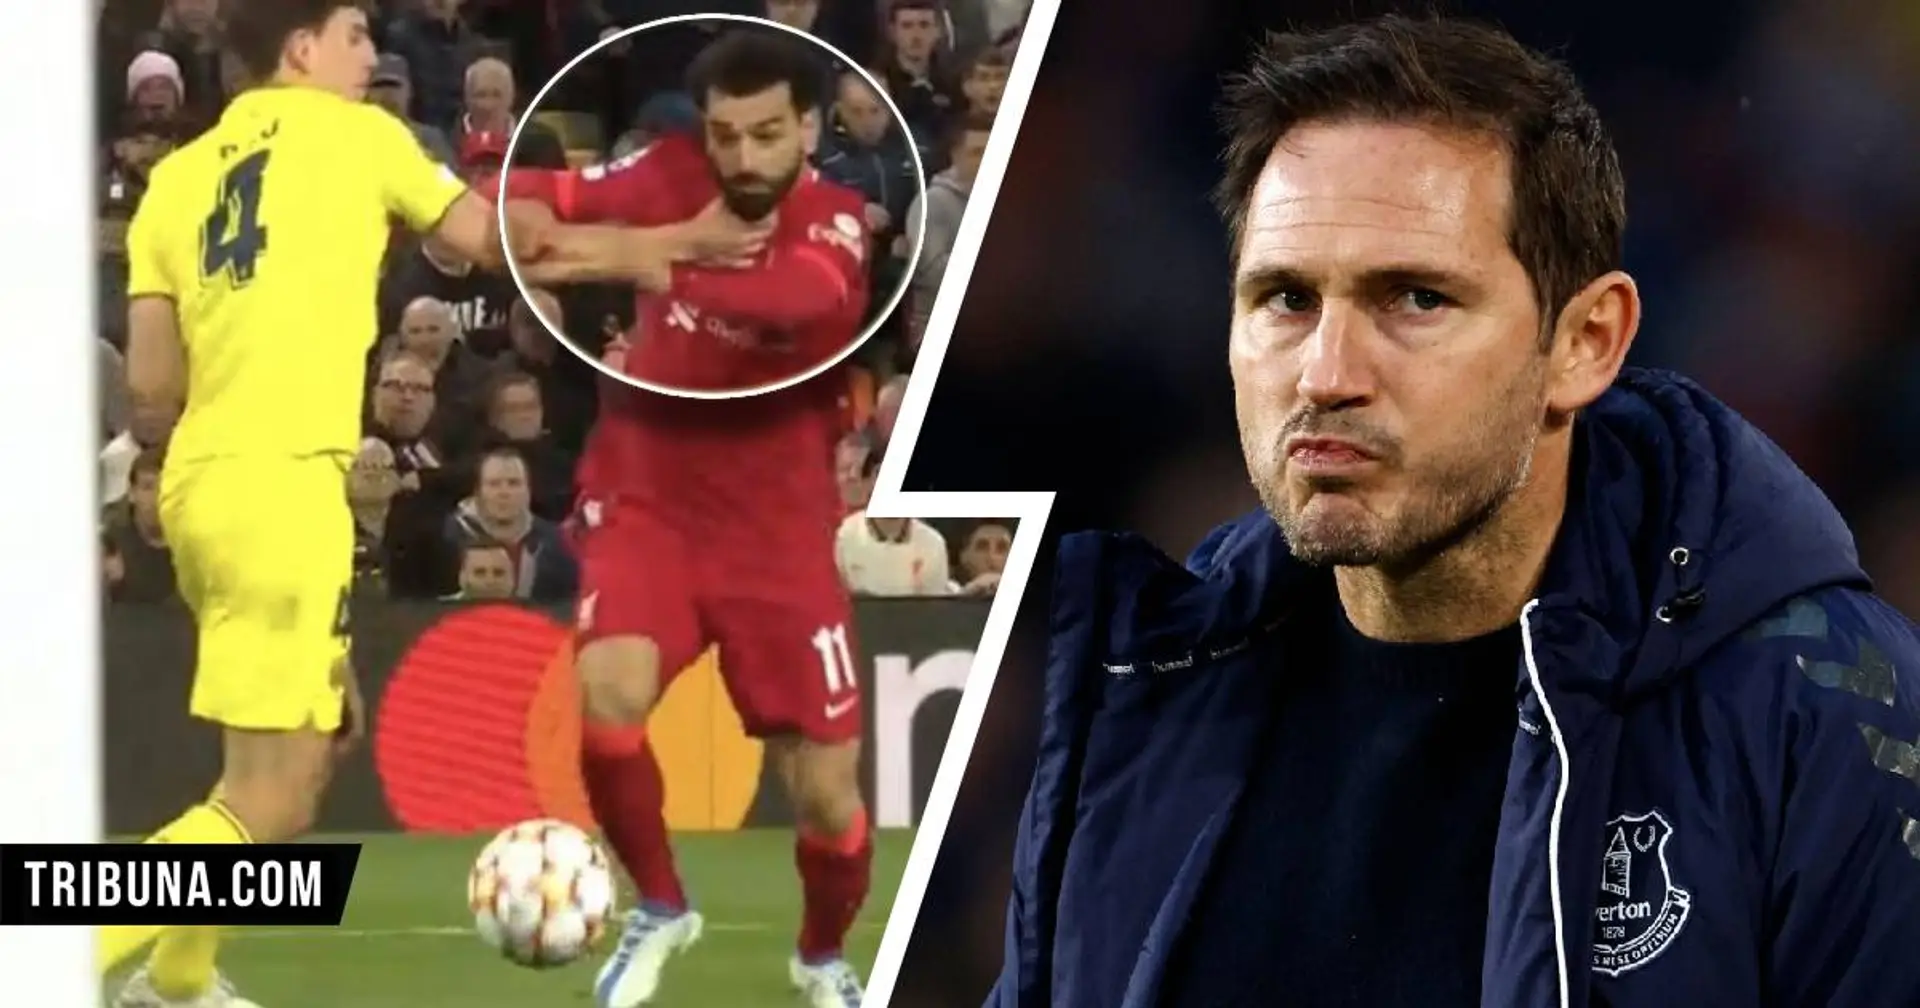 Will rival fans and Lampard complain now? Salah grabbed by his throat in Villarreal match but doesn't get penalty